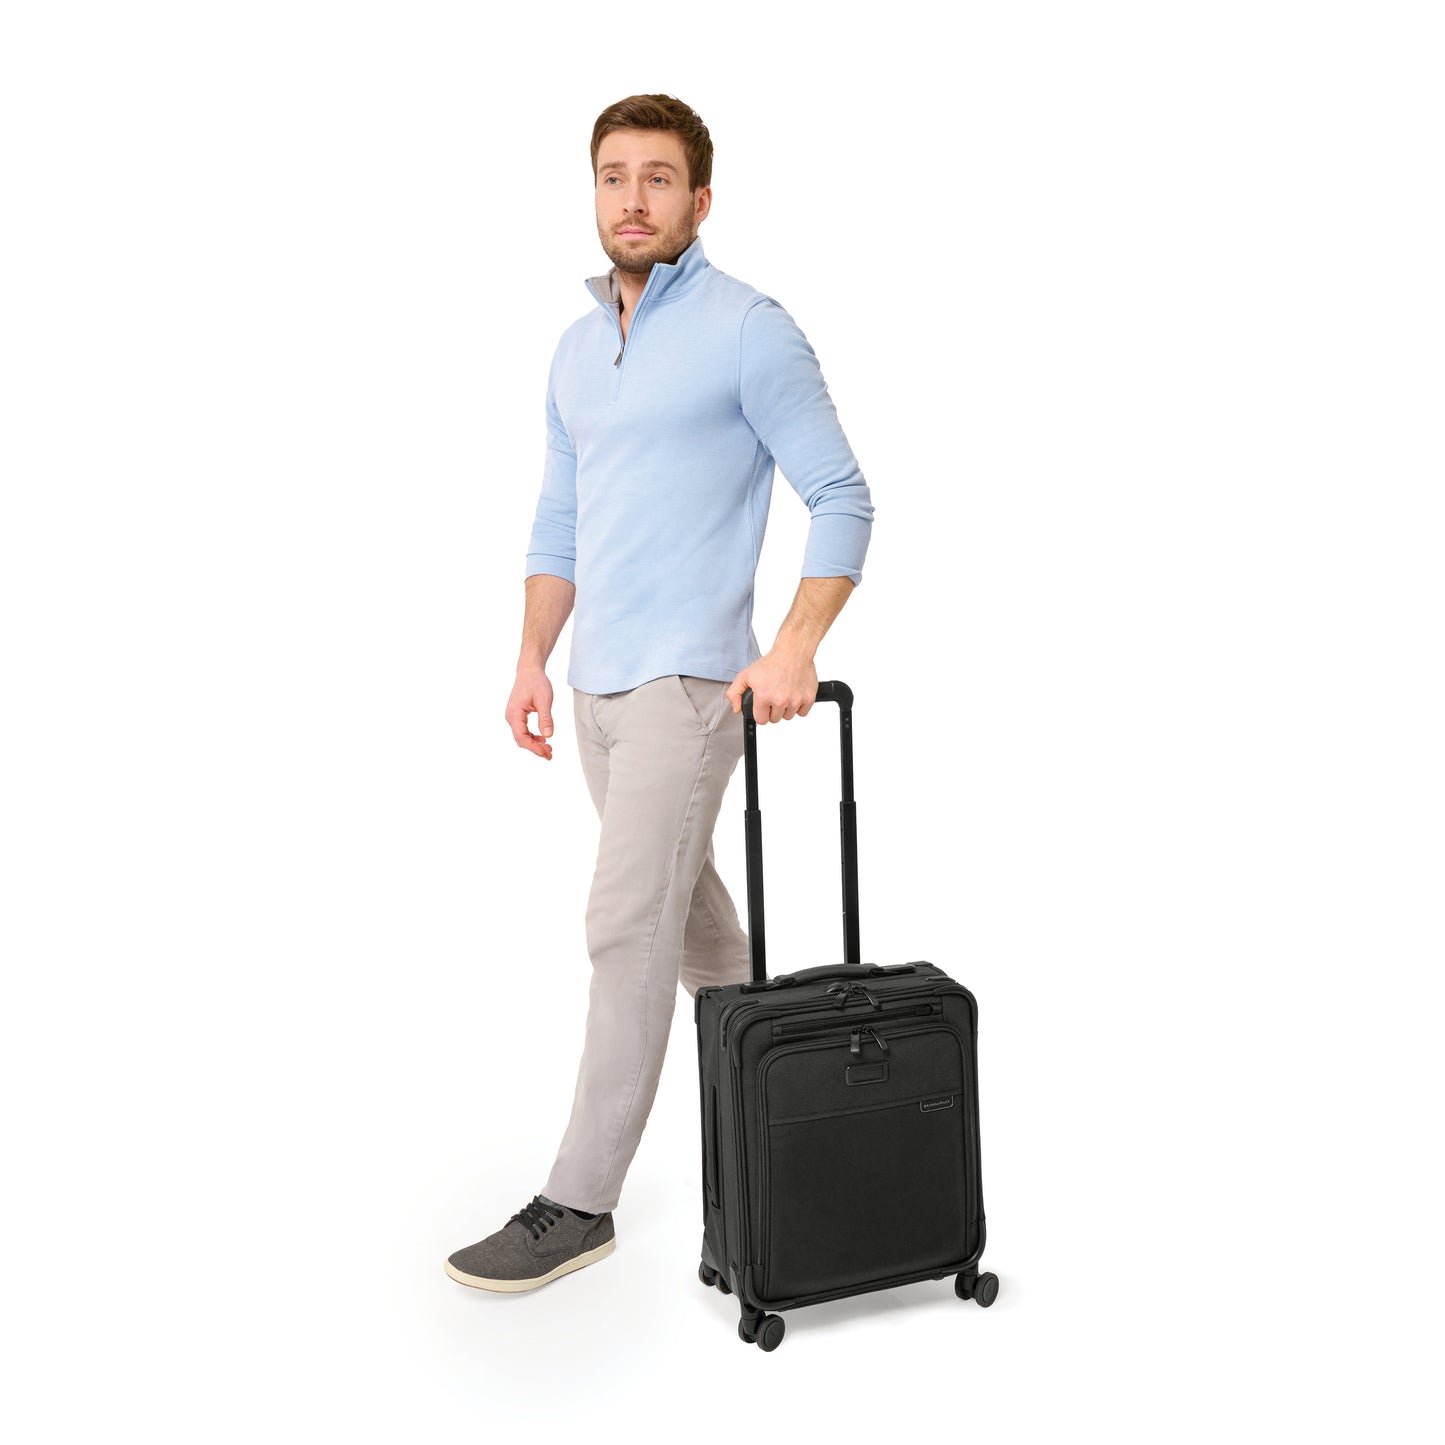 Briggs & Riley Baseline Softsided Compact Carry-On Spinner